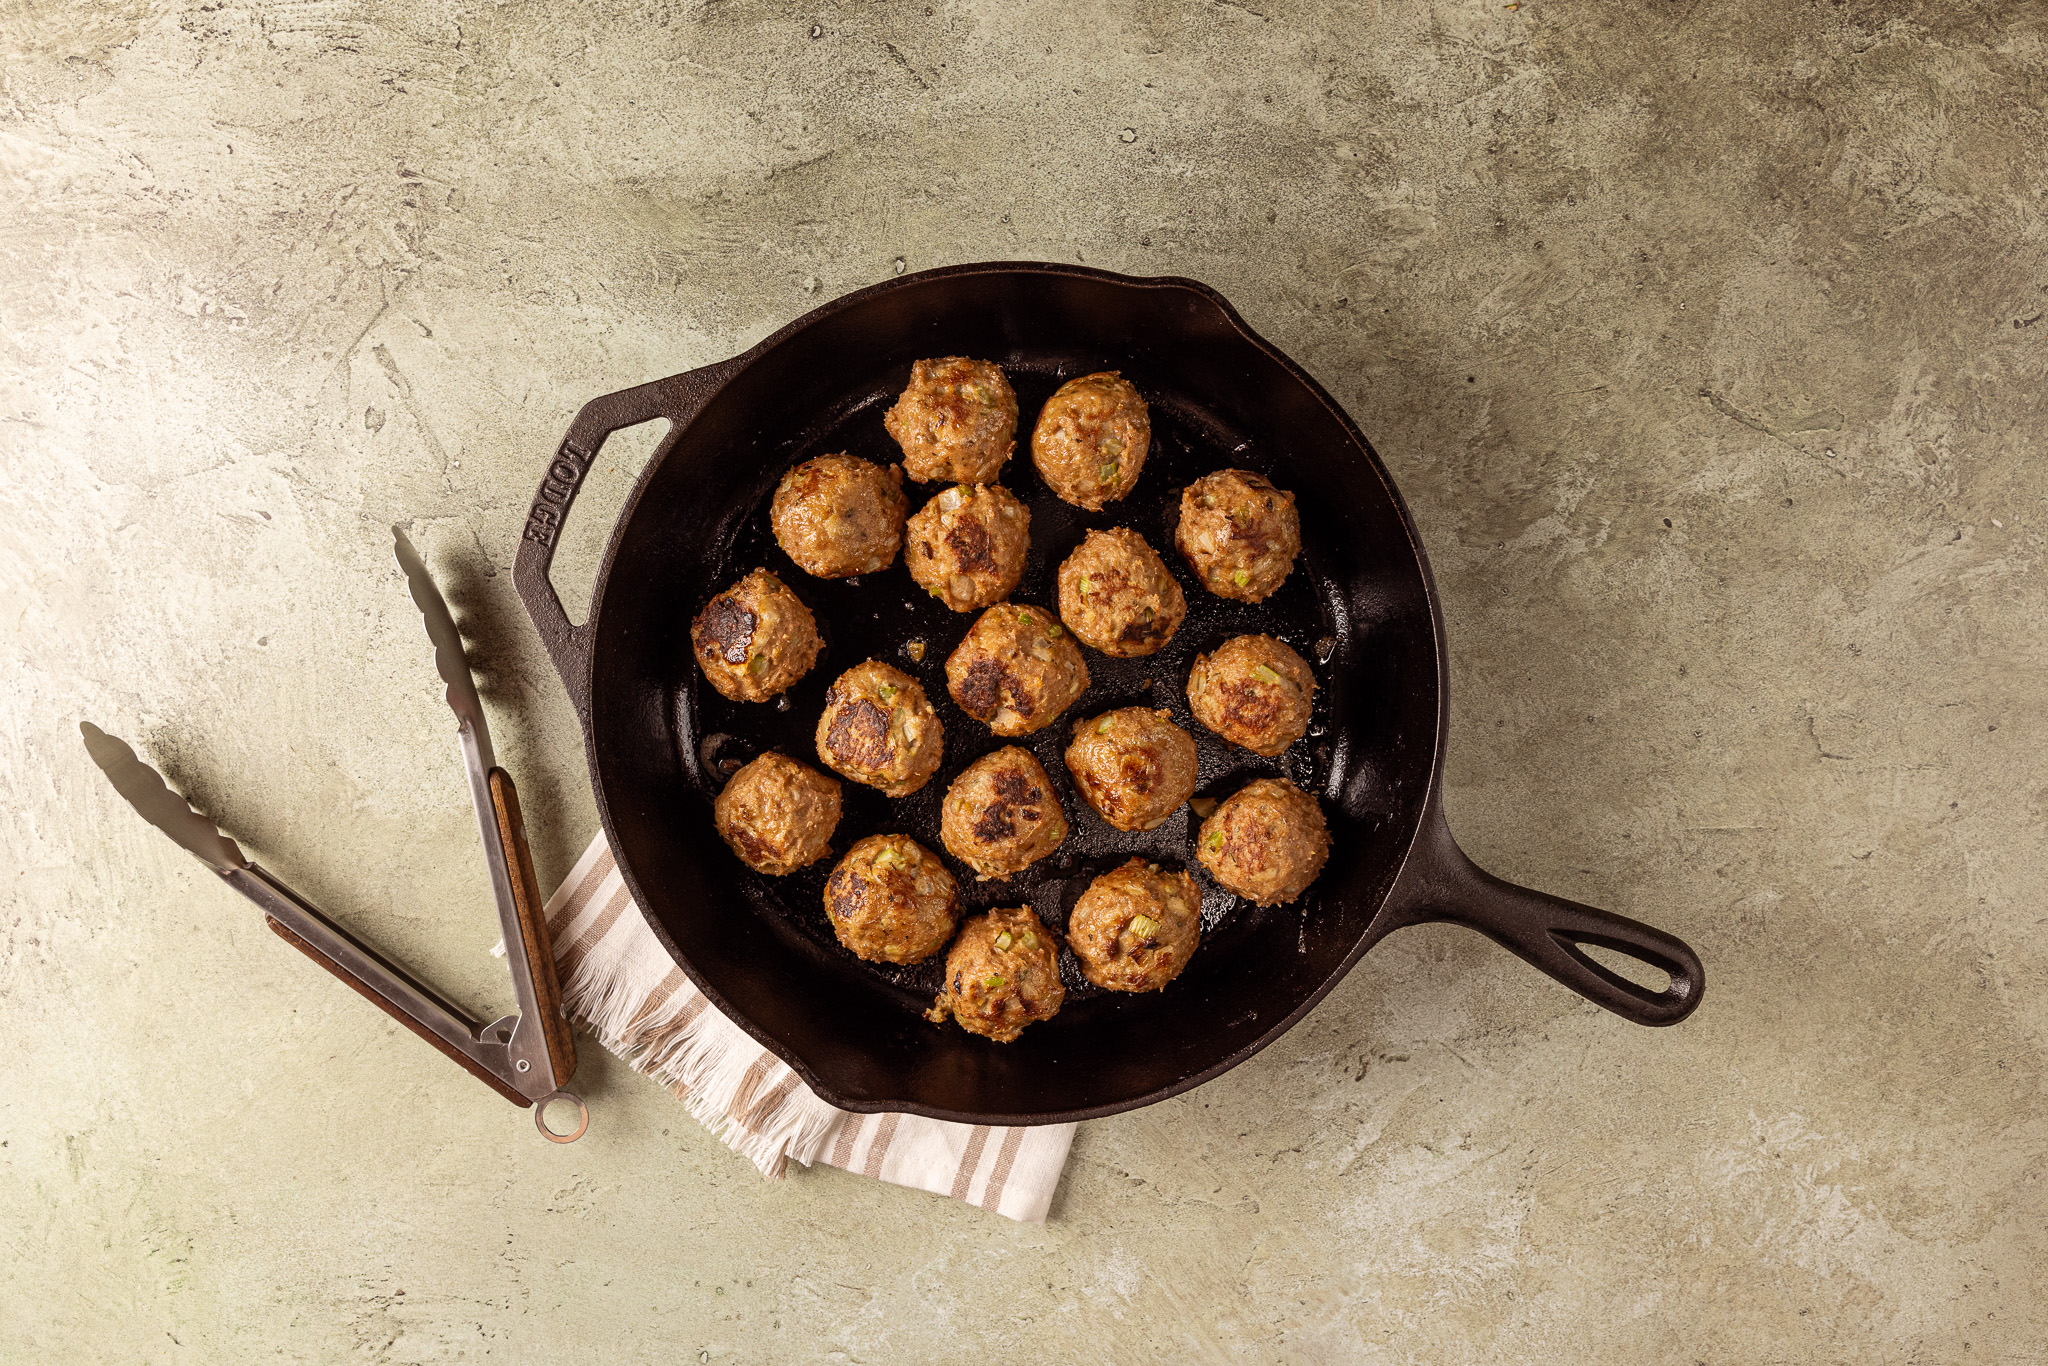 how-to-make-turkey-and-stuffing-meatballs-3c20cadf2251008b41536a2e